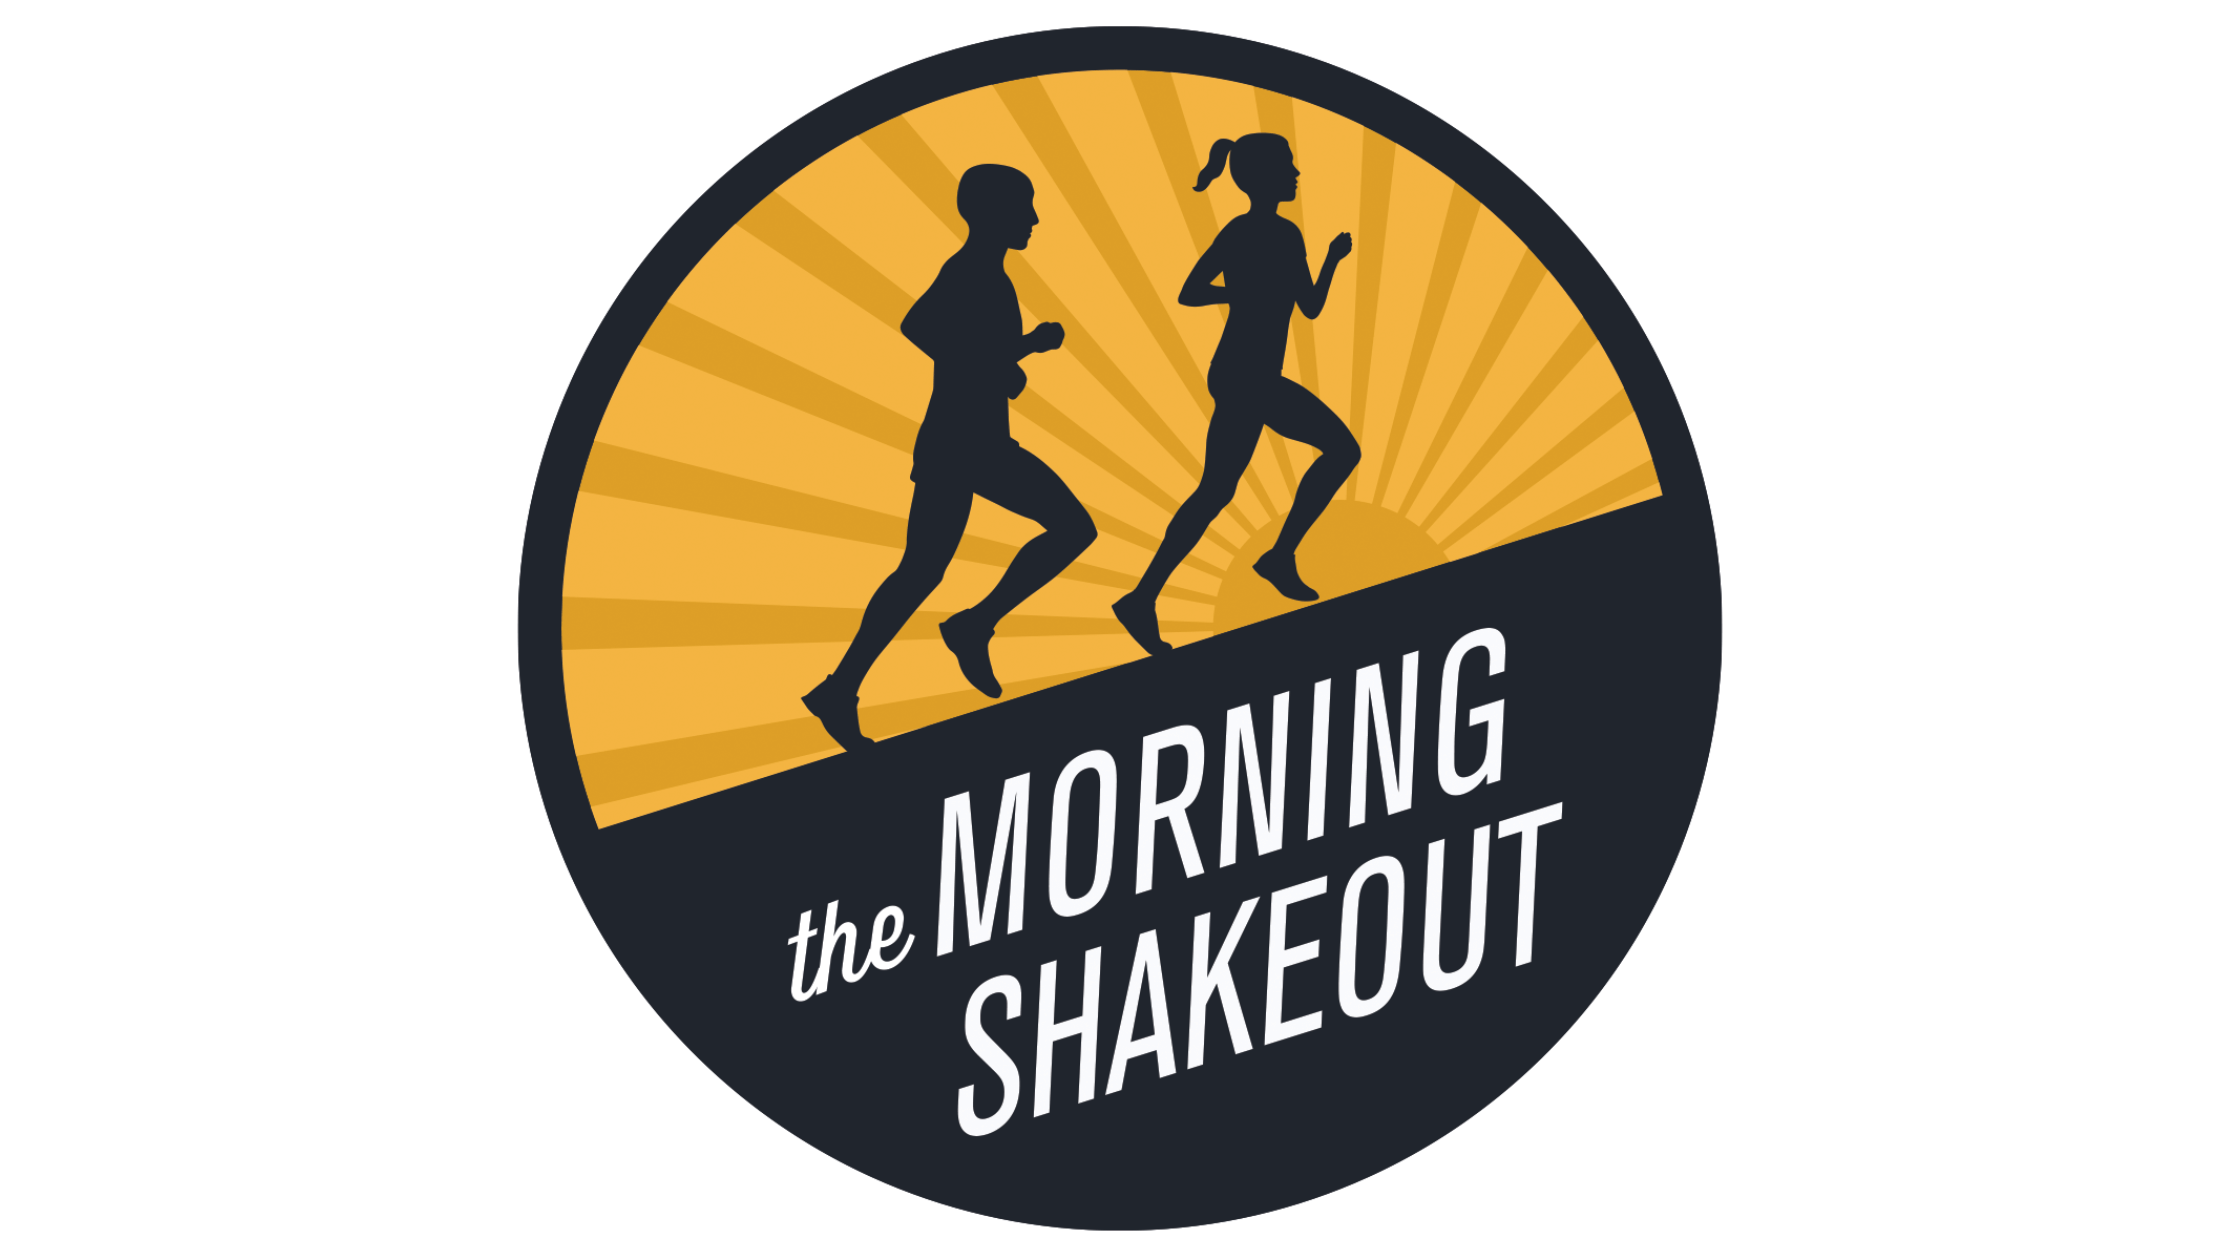 Best Running Podcast The Morning Shakeout